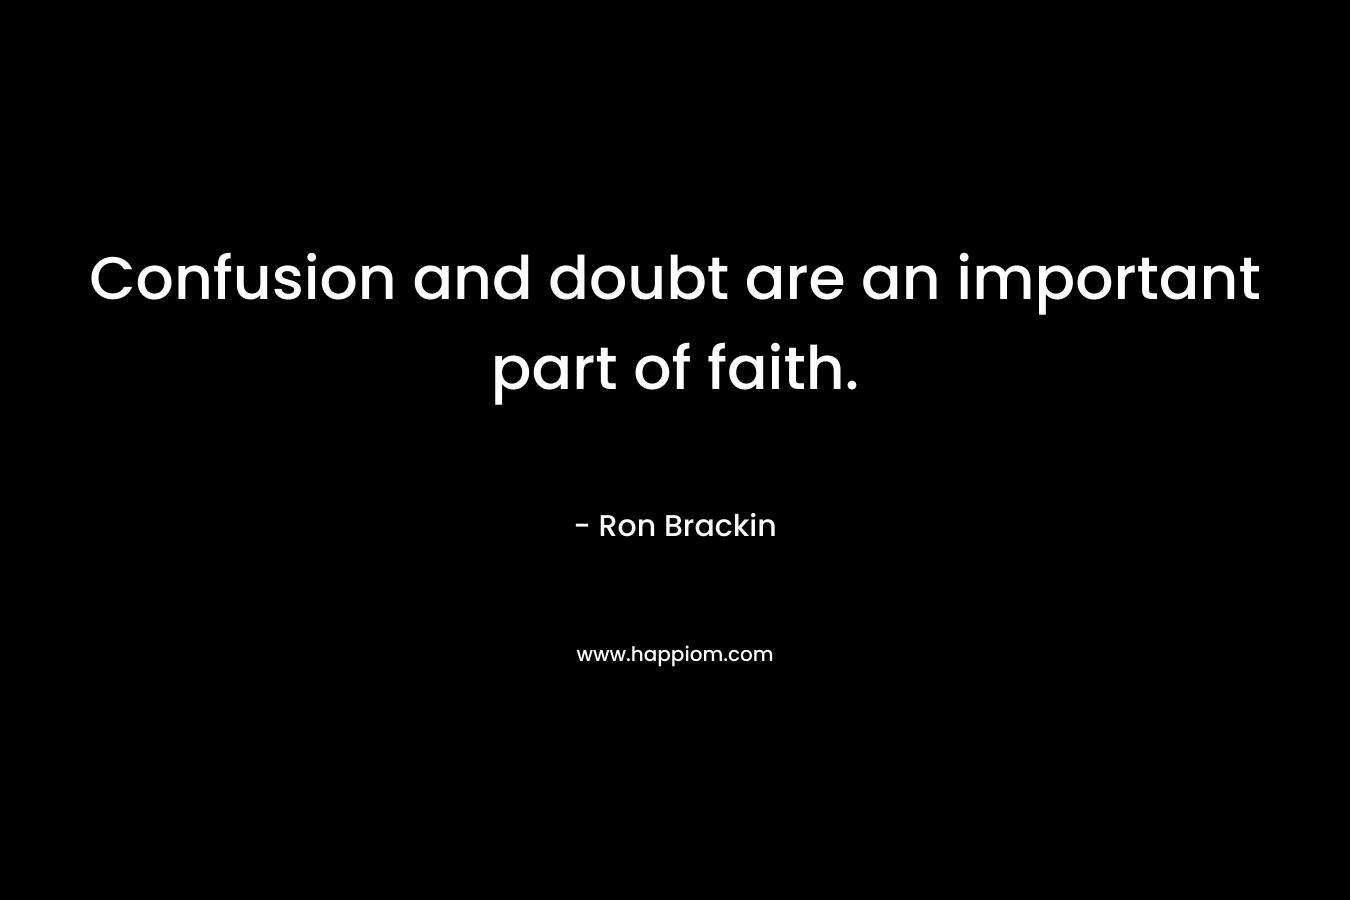 Confusion and doubt are an important part of faith. – Ron Brackin